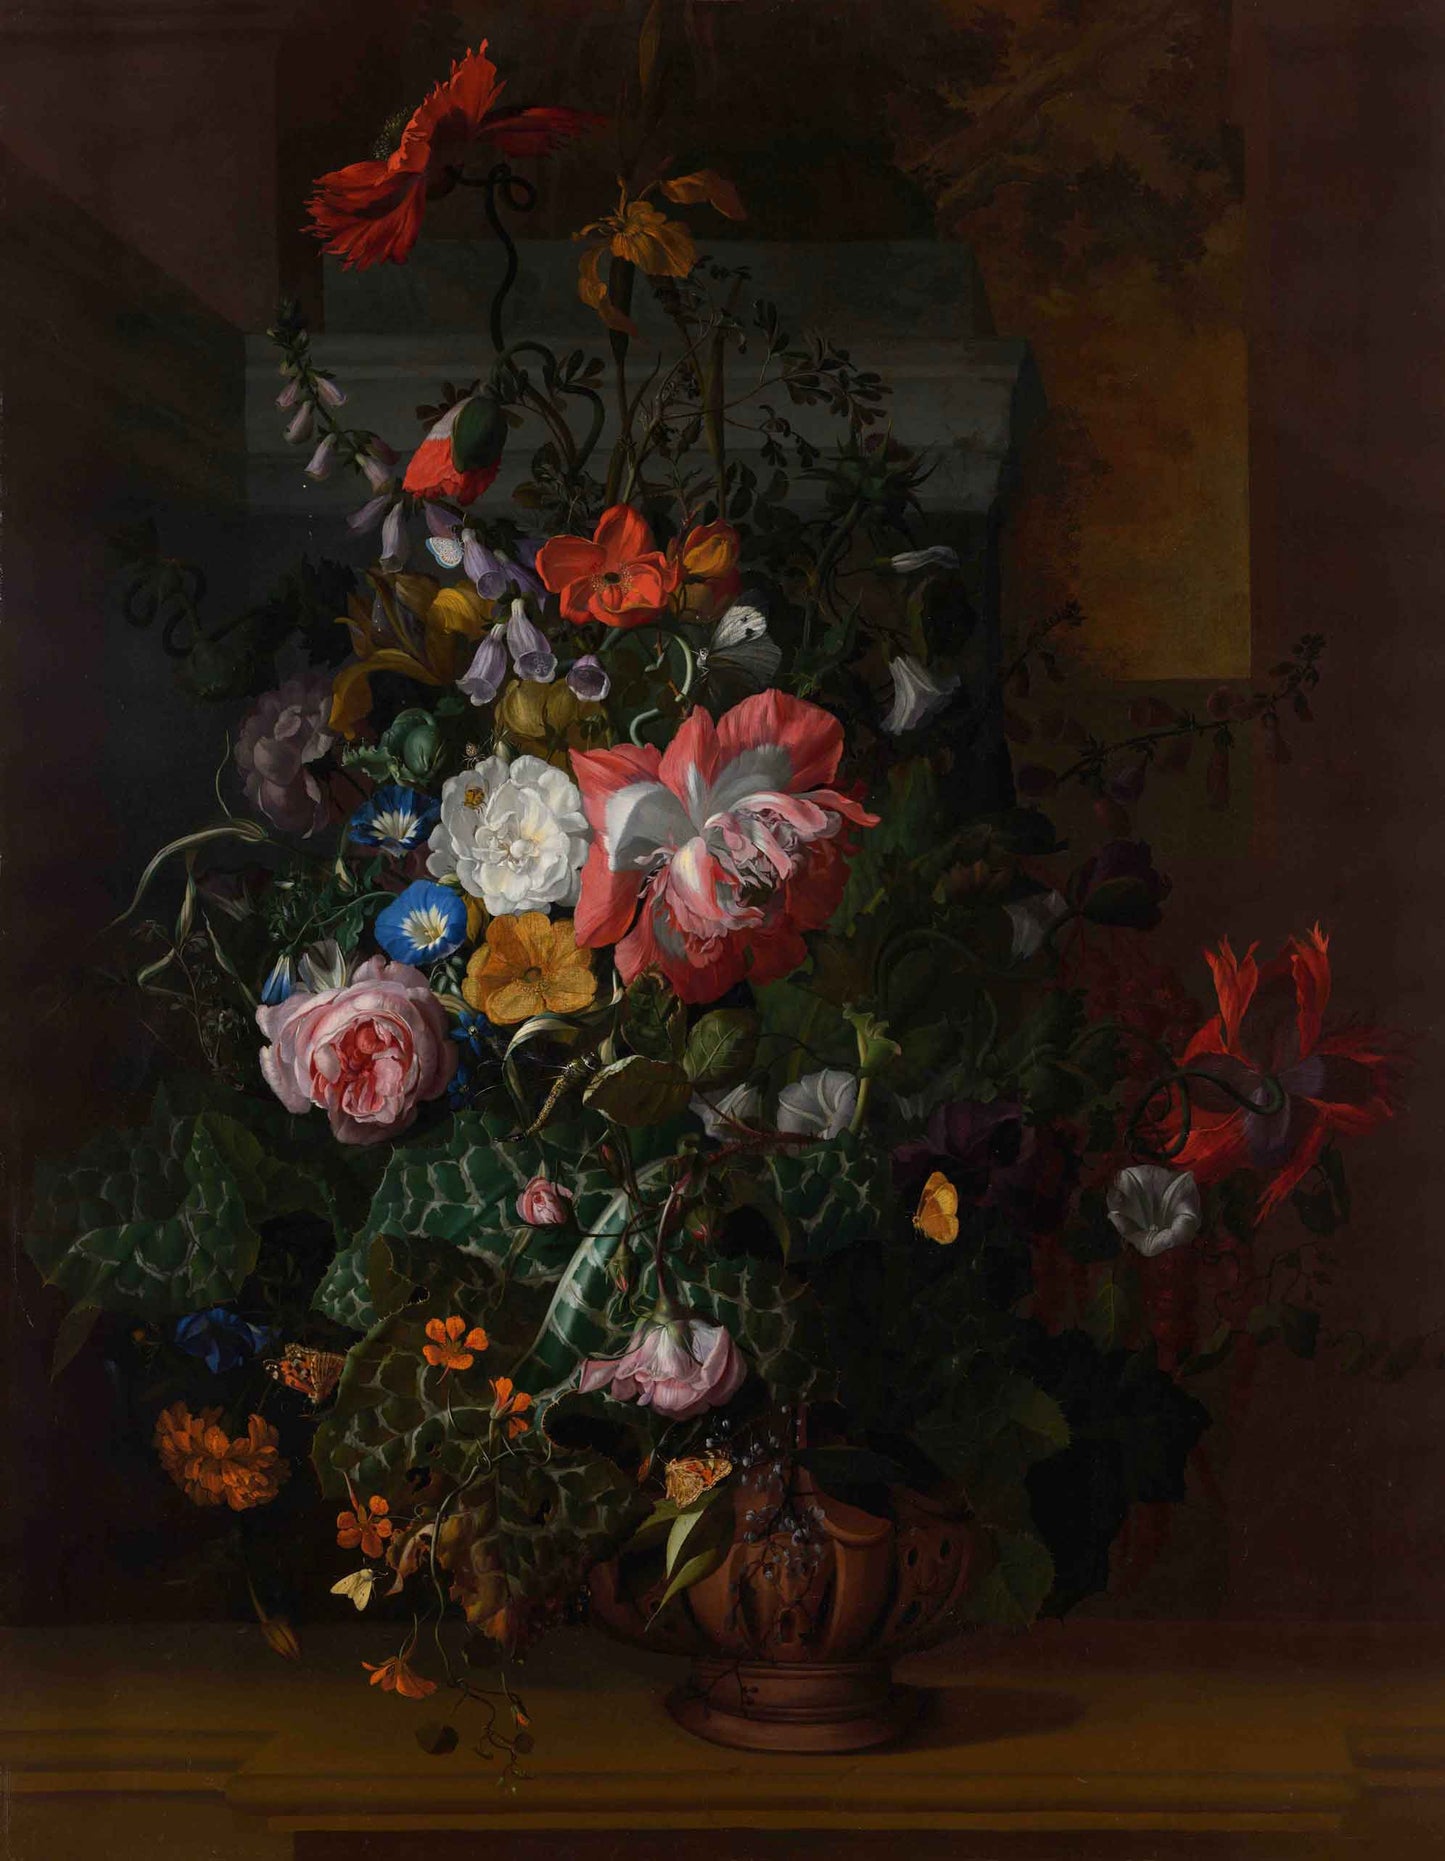 Roses, Convolvulus, Poppies, and Other Flowers in an Urn on a Stone Ledge